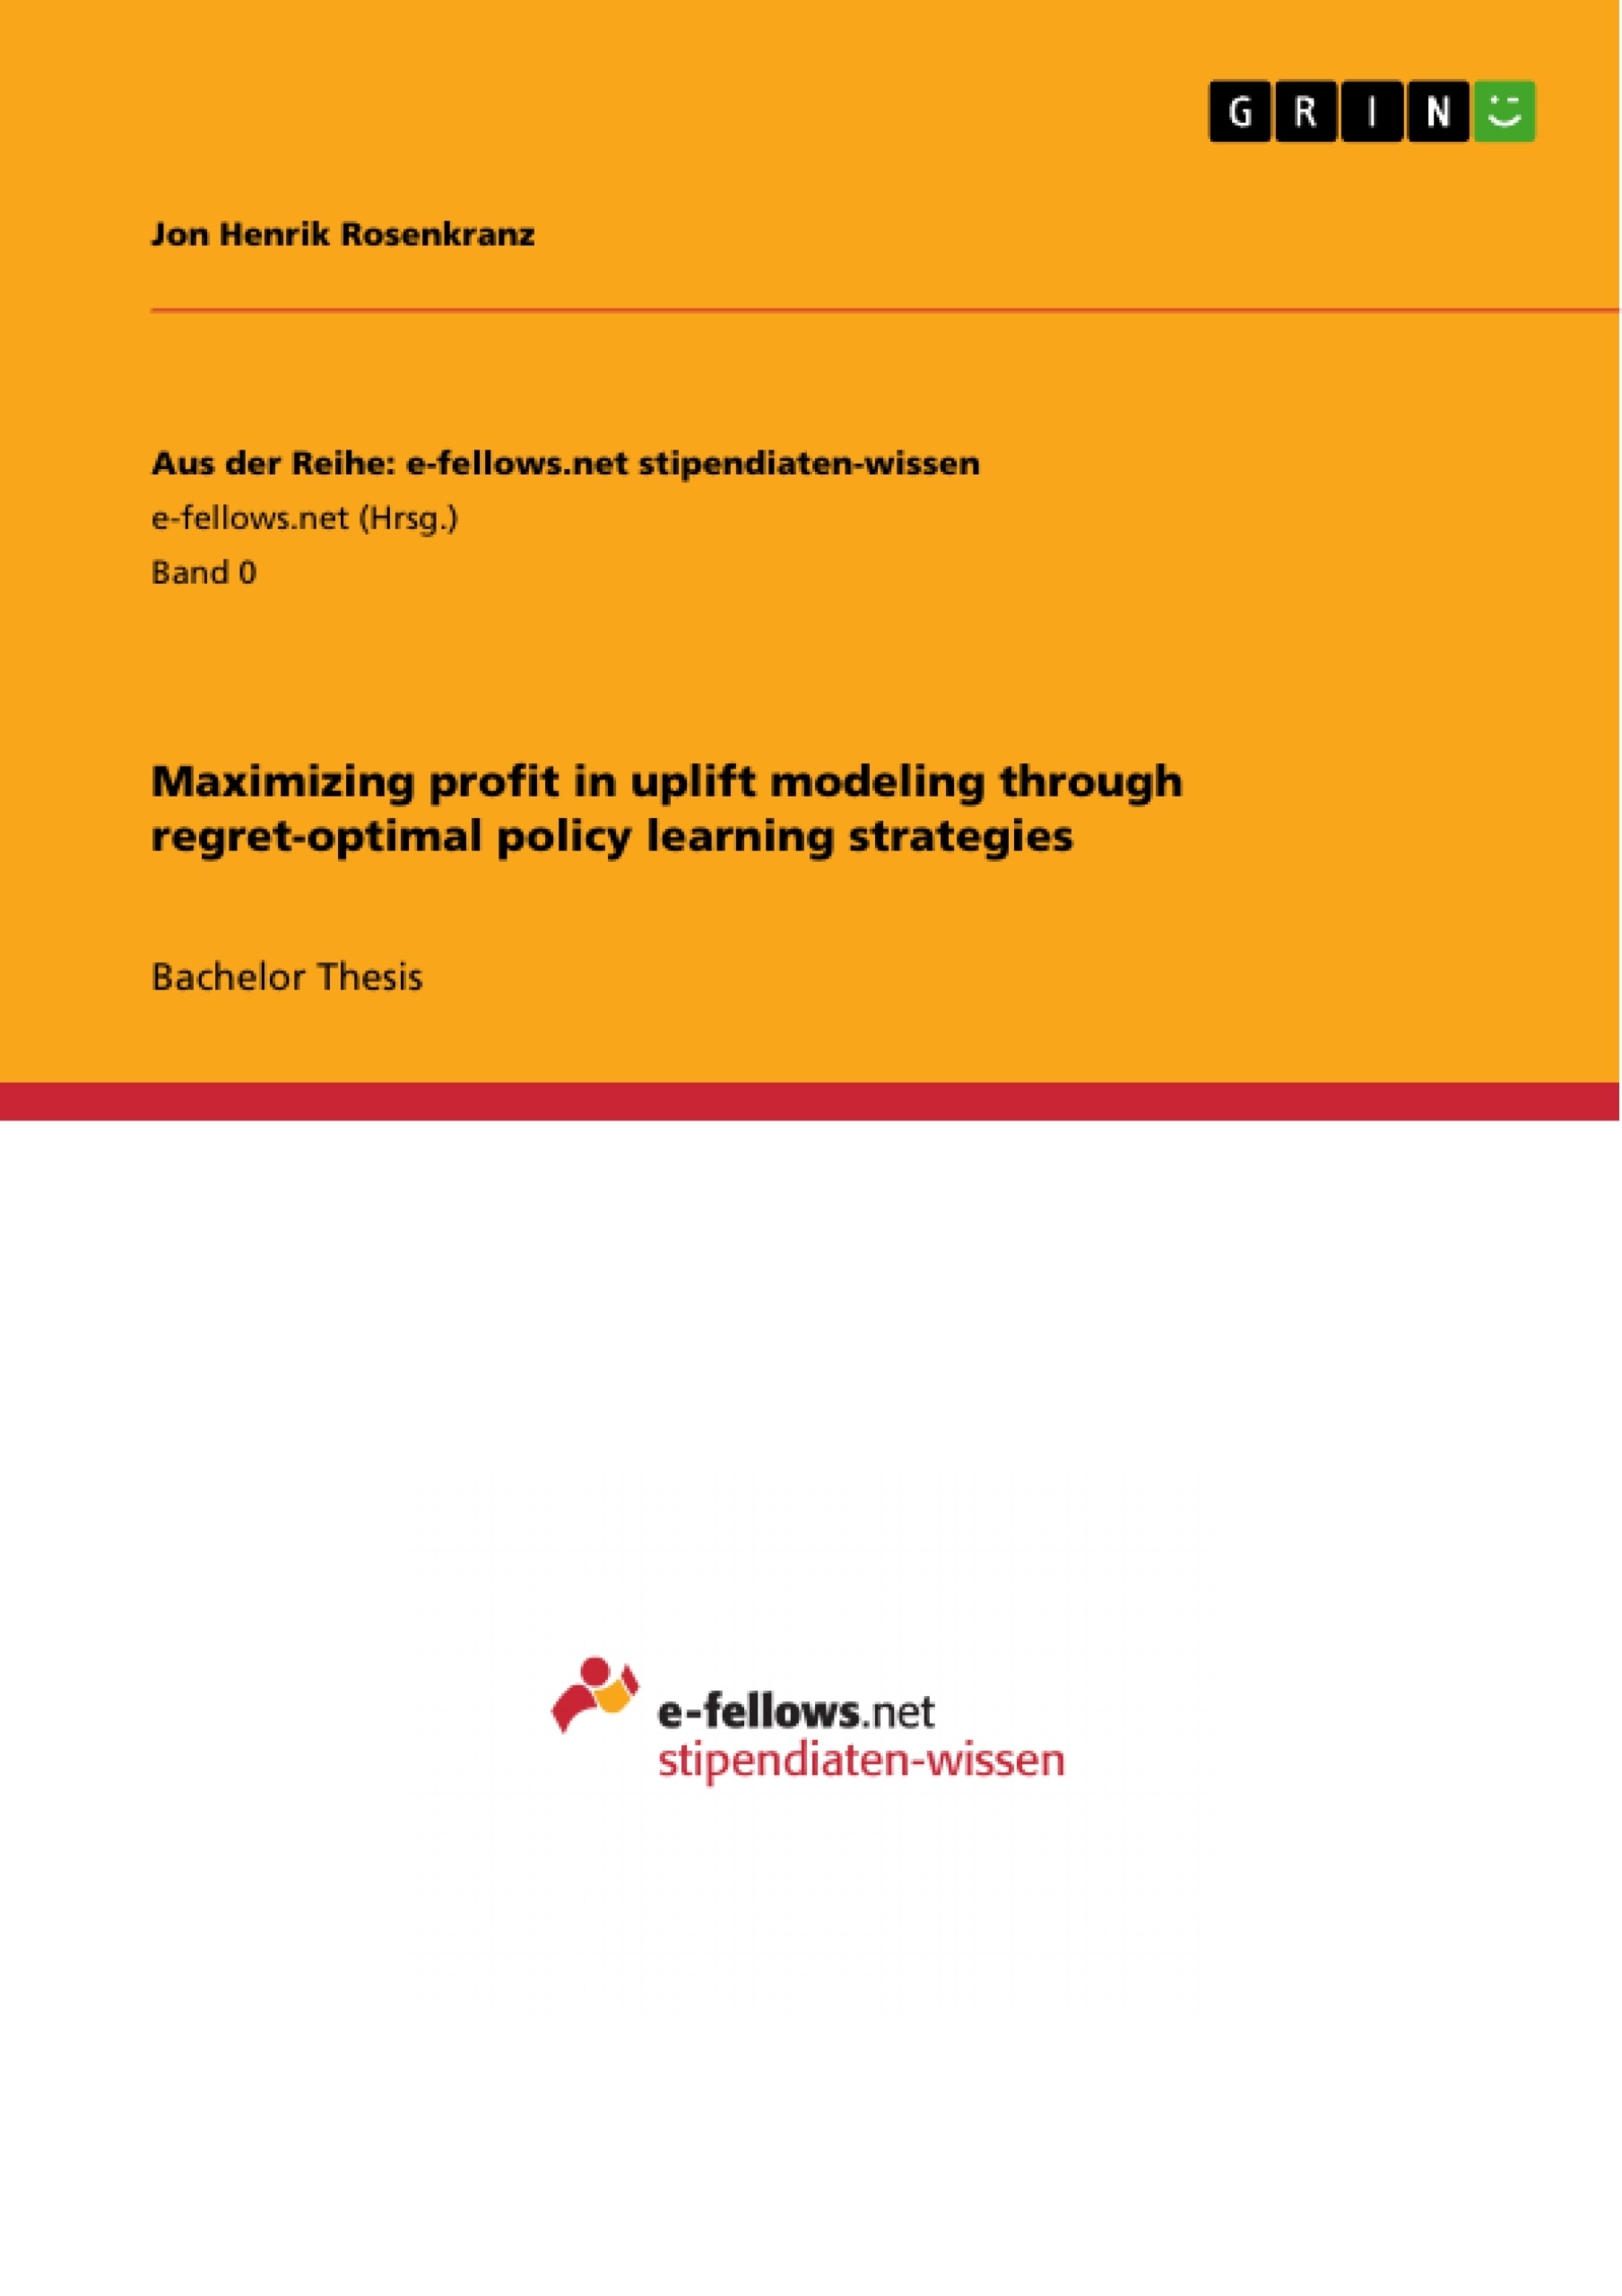 Title: Maximizing profit in uplift modeling through regret-optimal policy learning strategies